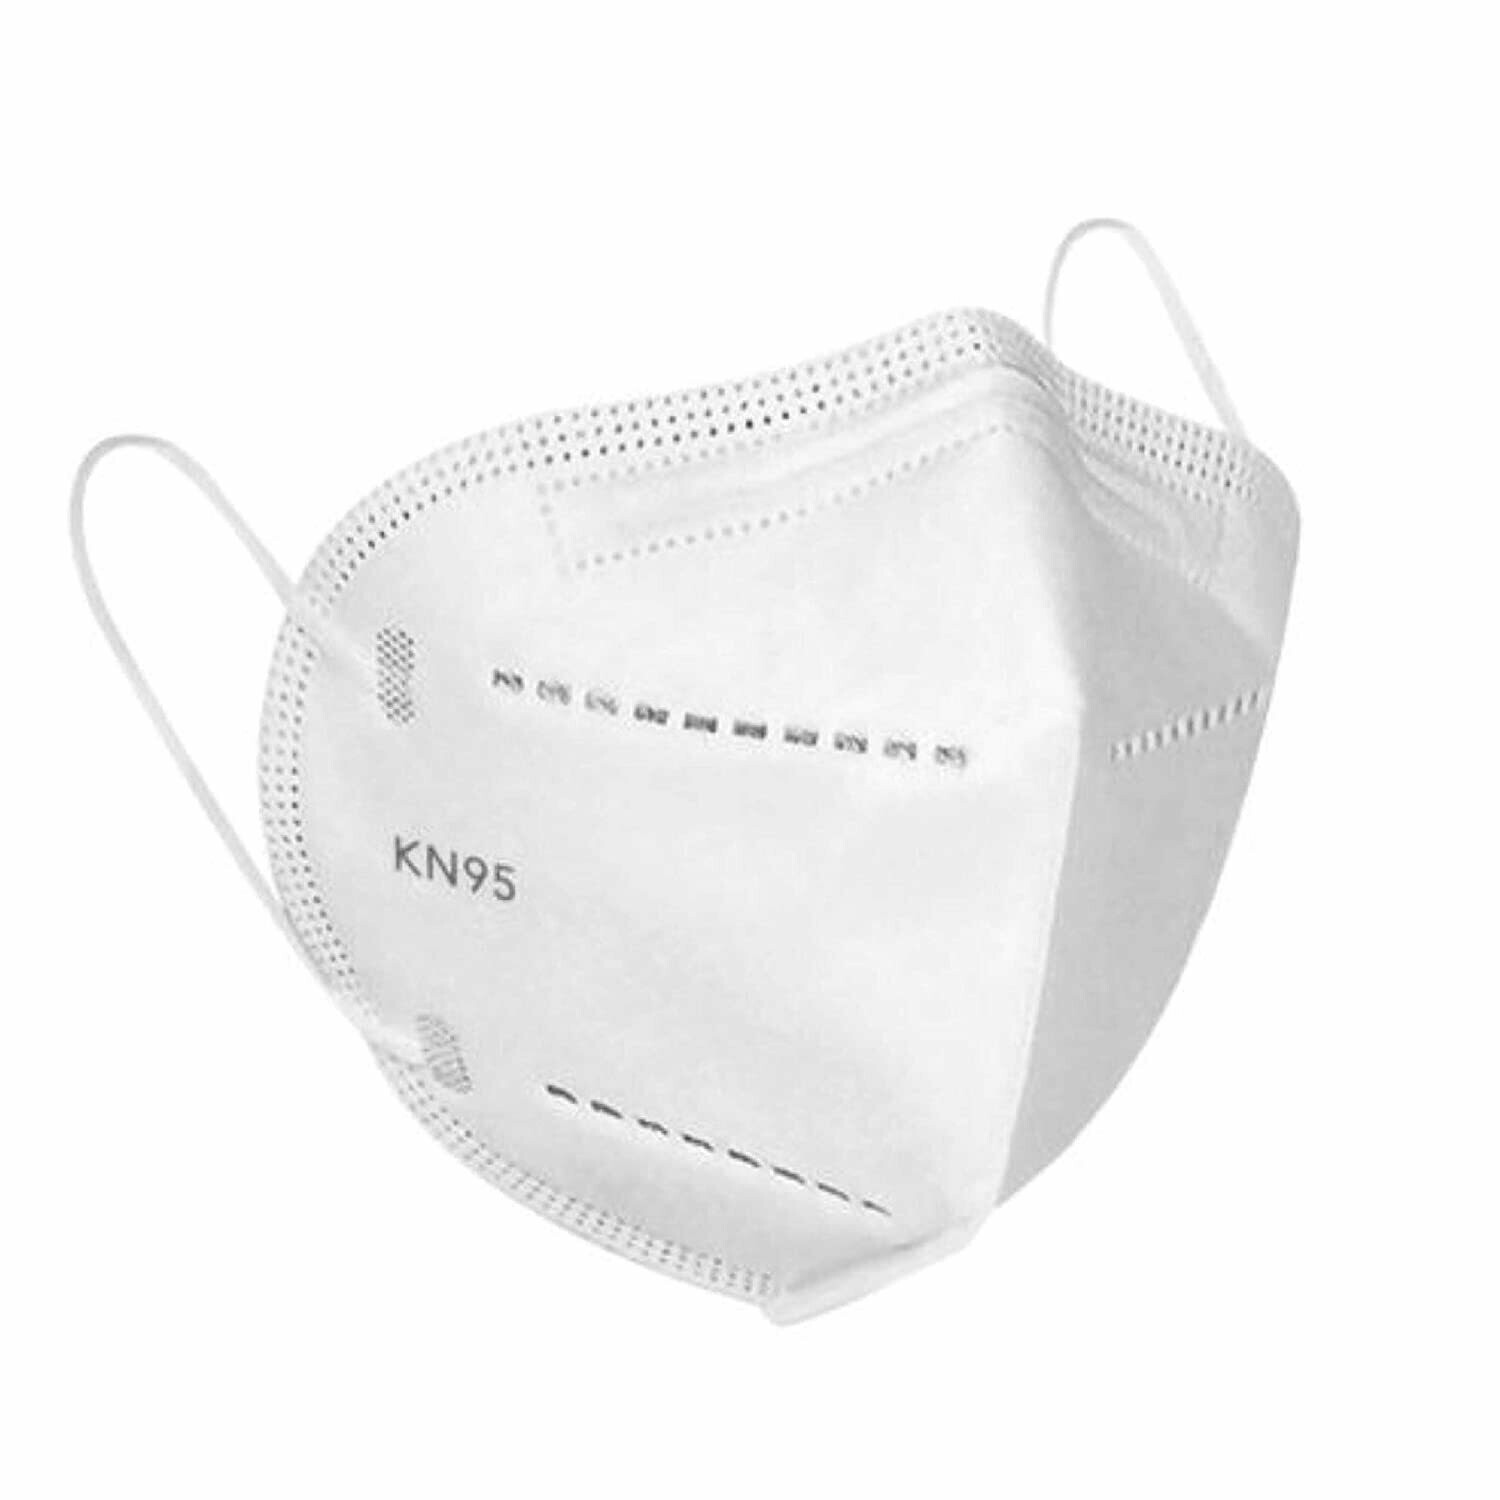 20 Pack Non-powered Air-purifying Particle Respirator ( For non-Medical use )